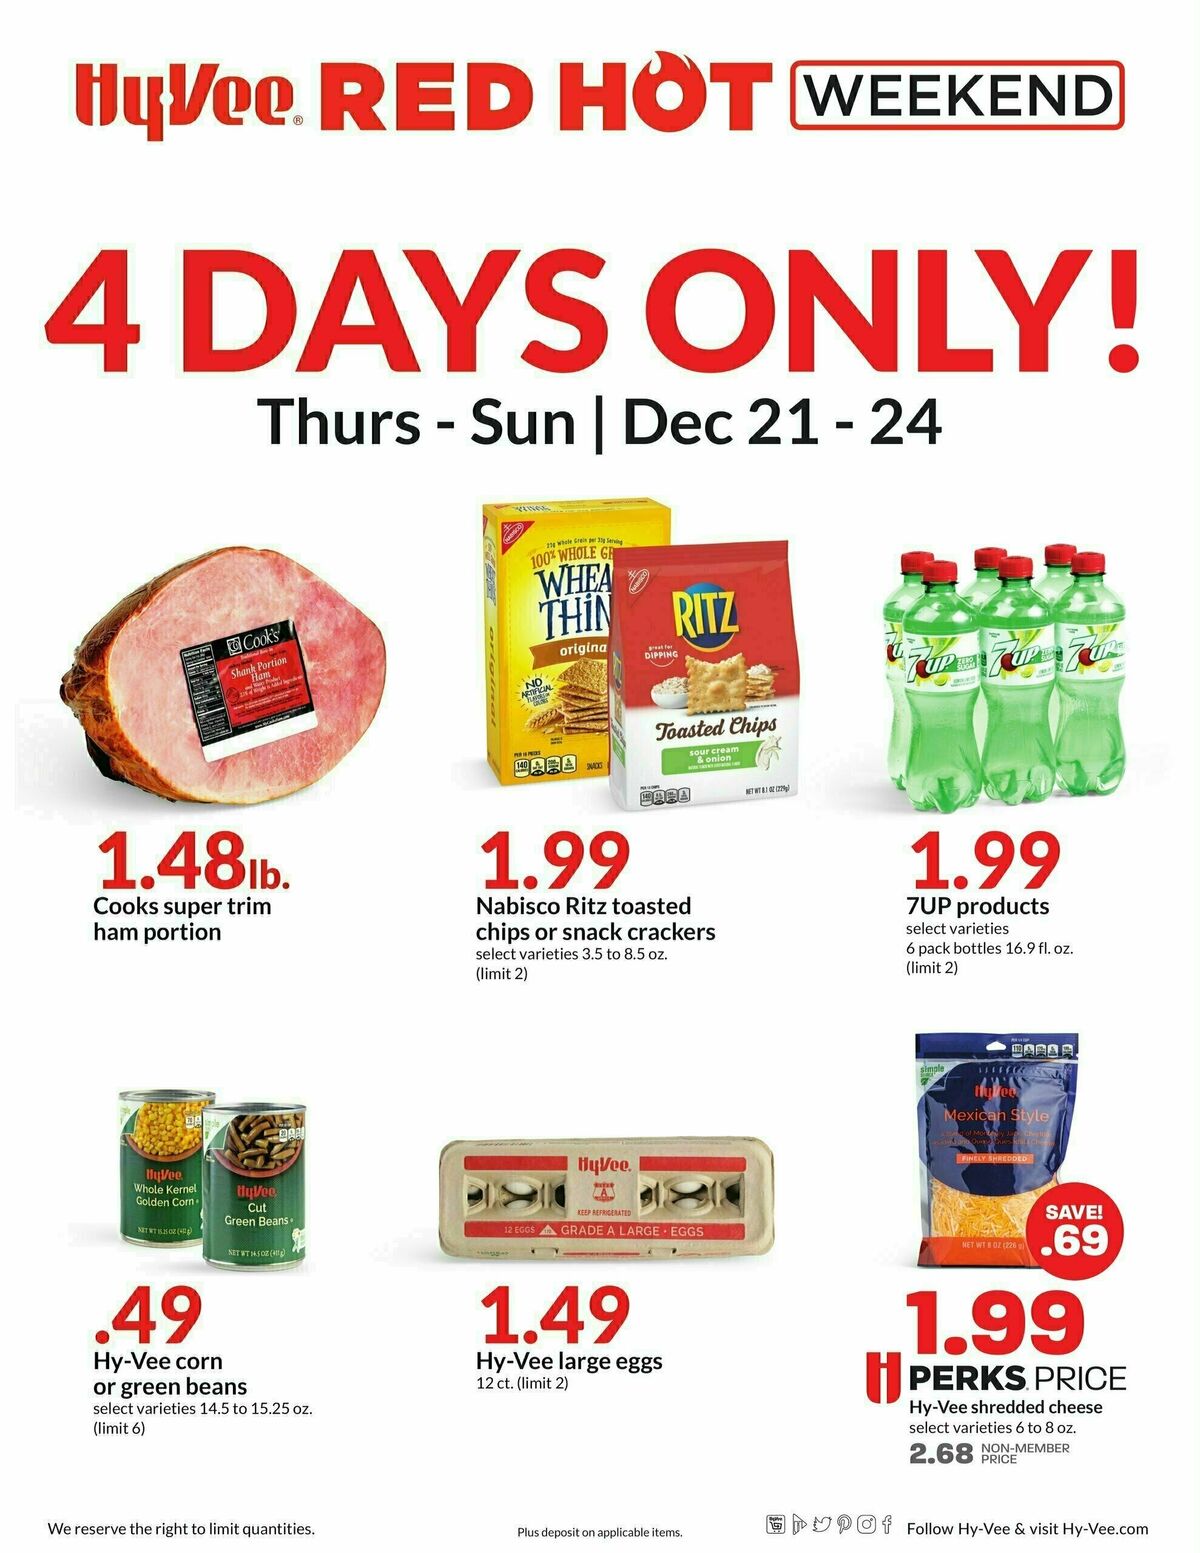 HyVee Red Hot Weekend Deals & Ads from December 21